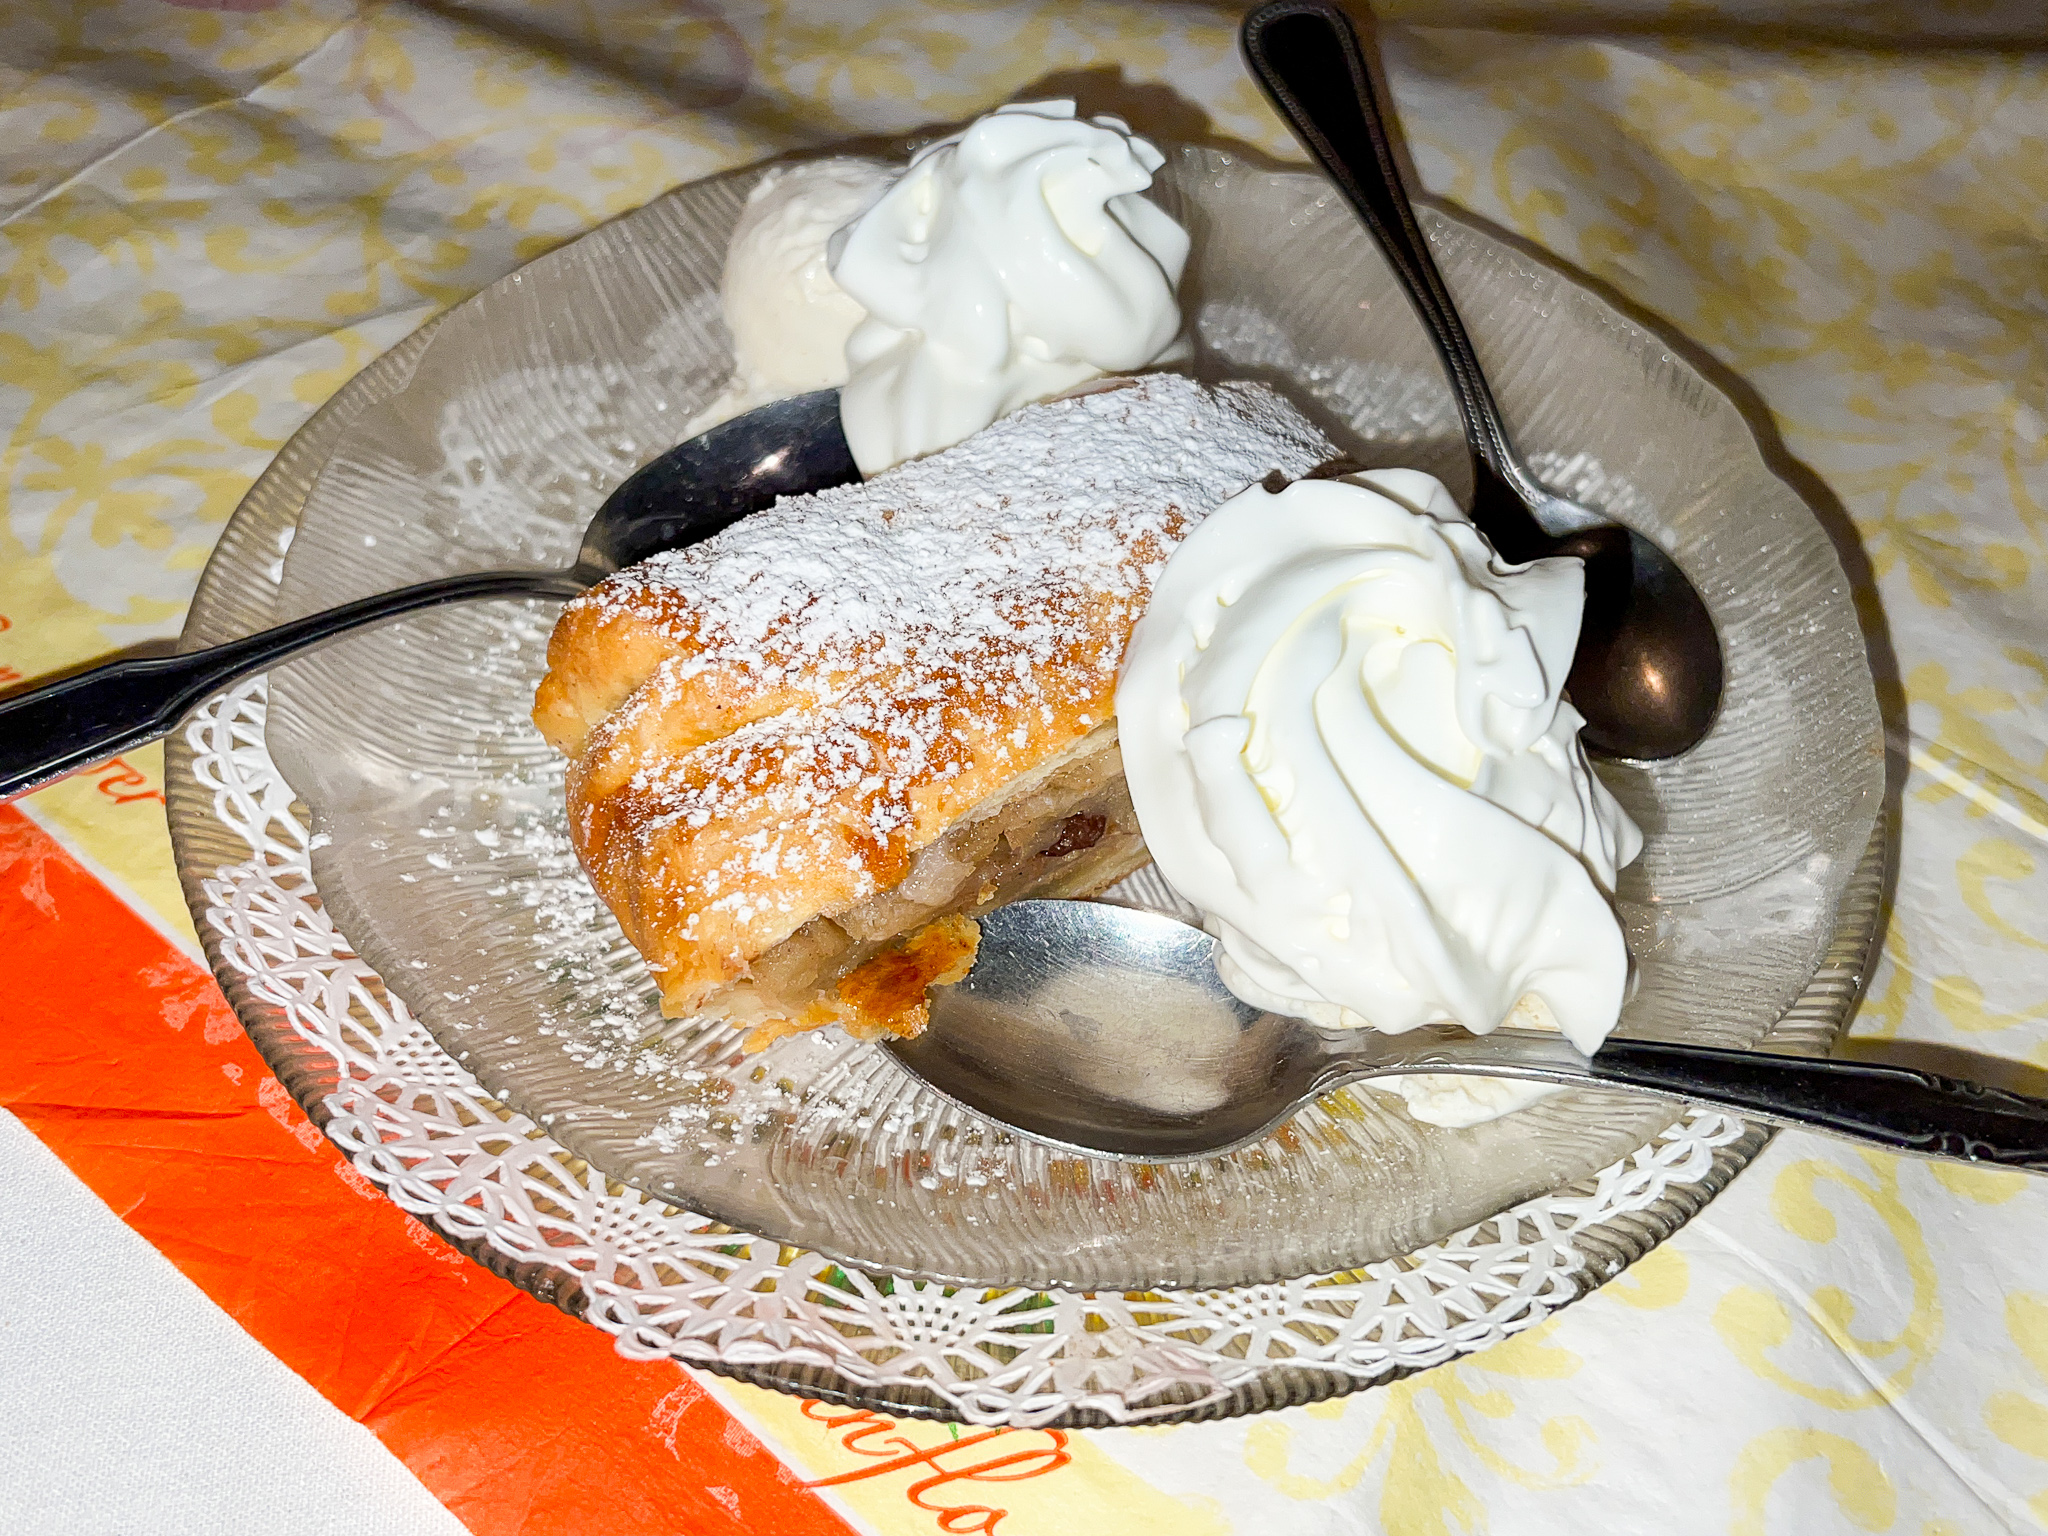 The Good Times Apple Strudel